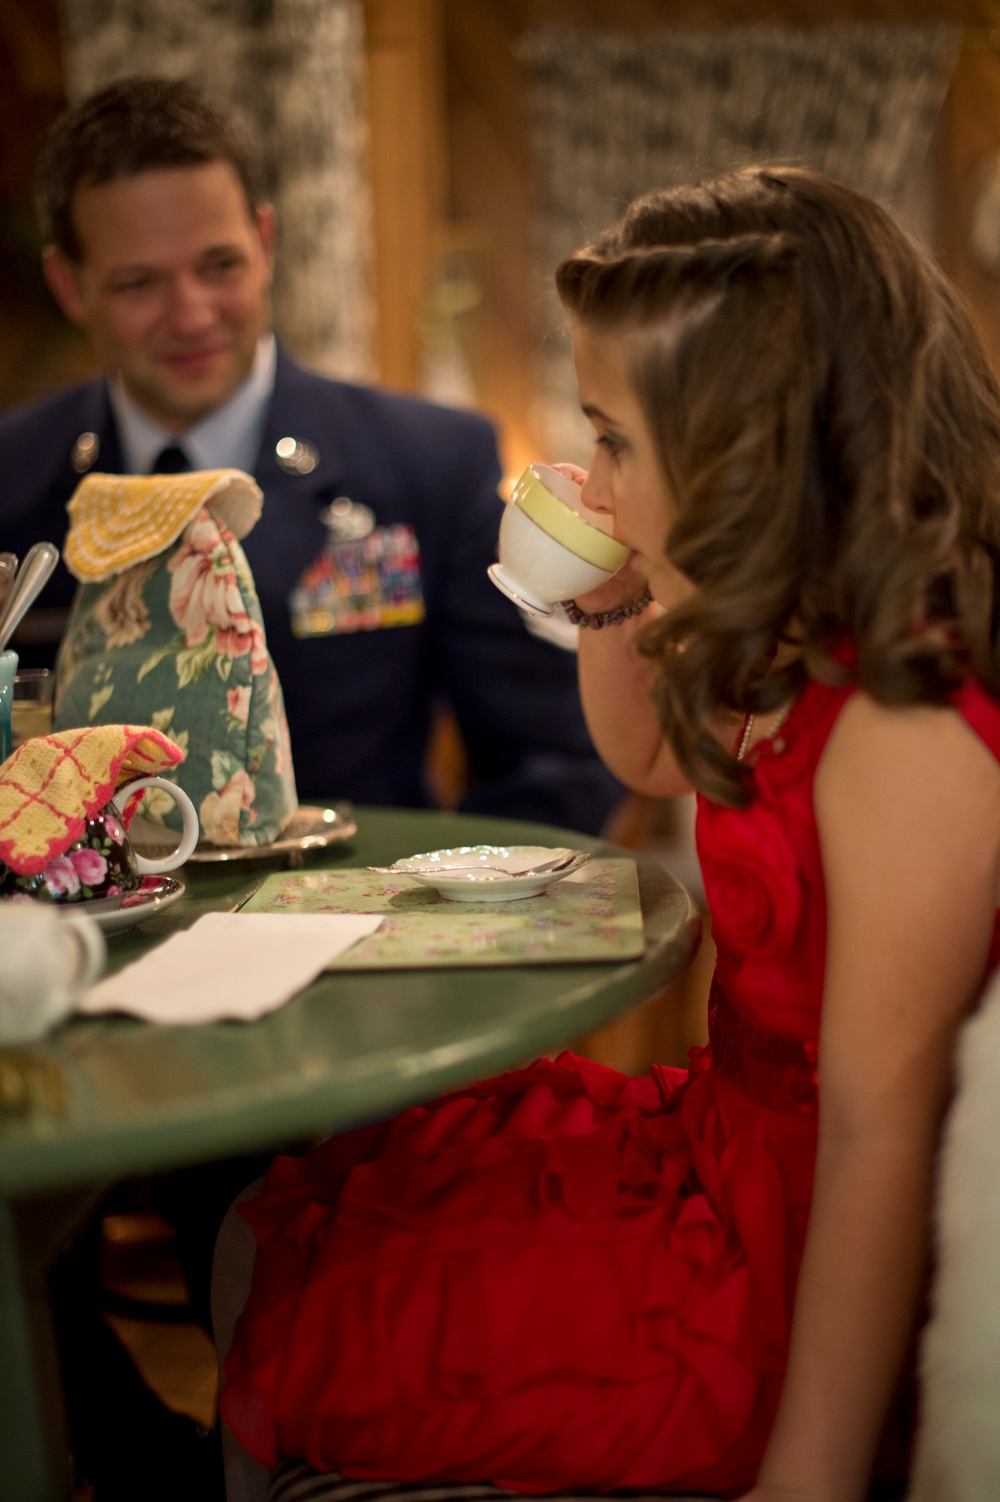 Teatime with Air Force Dad